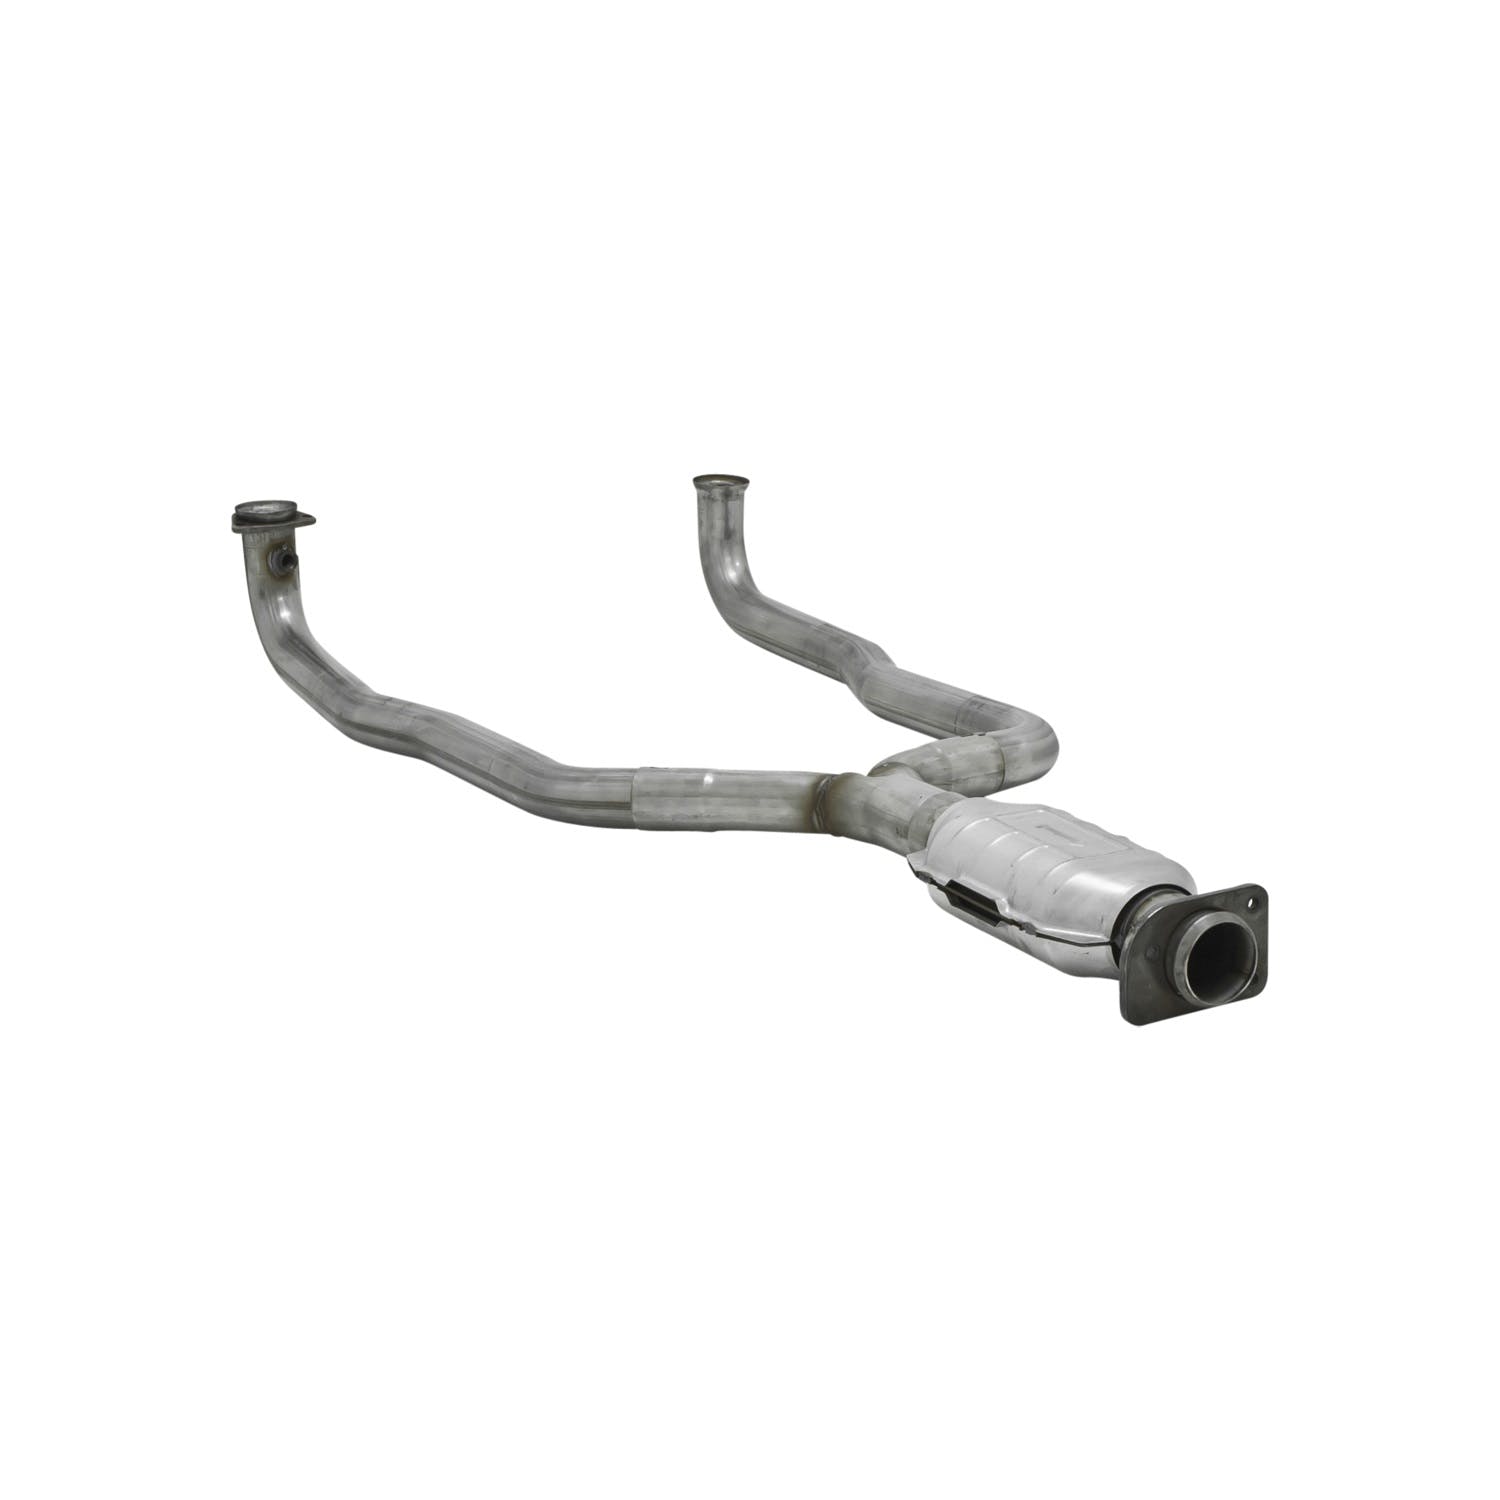 Flowmaster Catalytic Converters 2010028 Catalytic Converter-Direct Fit-3.00 in. Inlet/Outlet-49 State